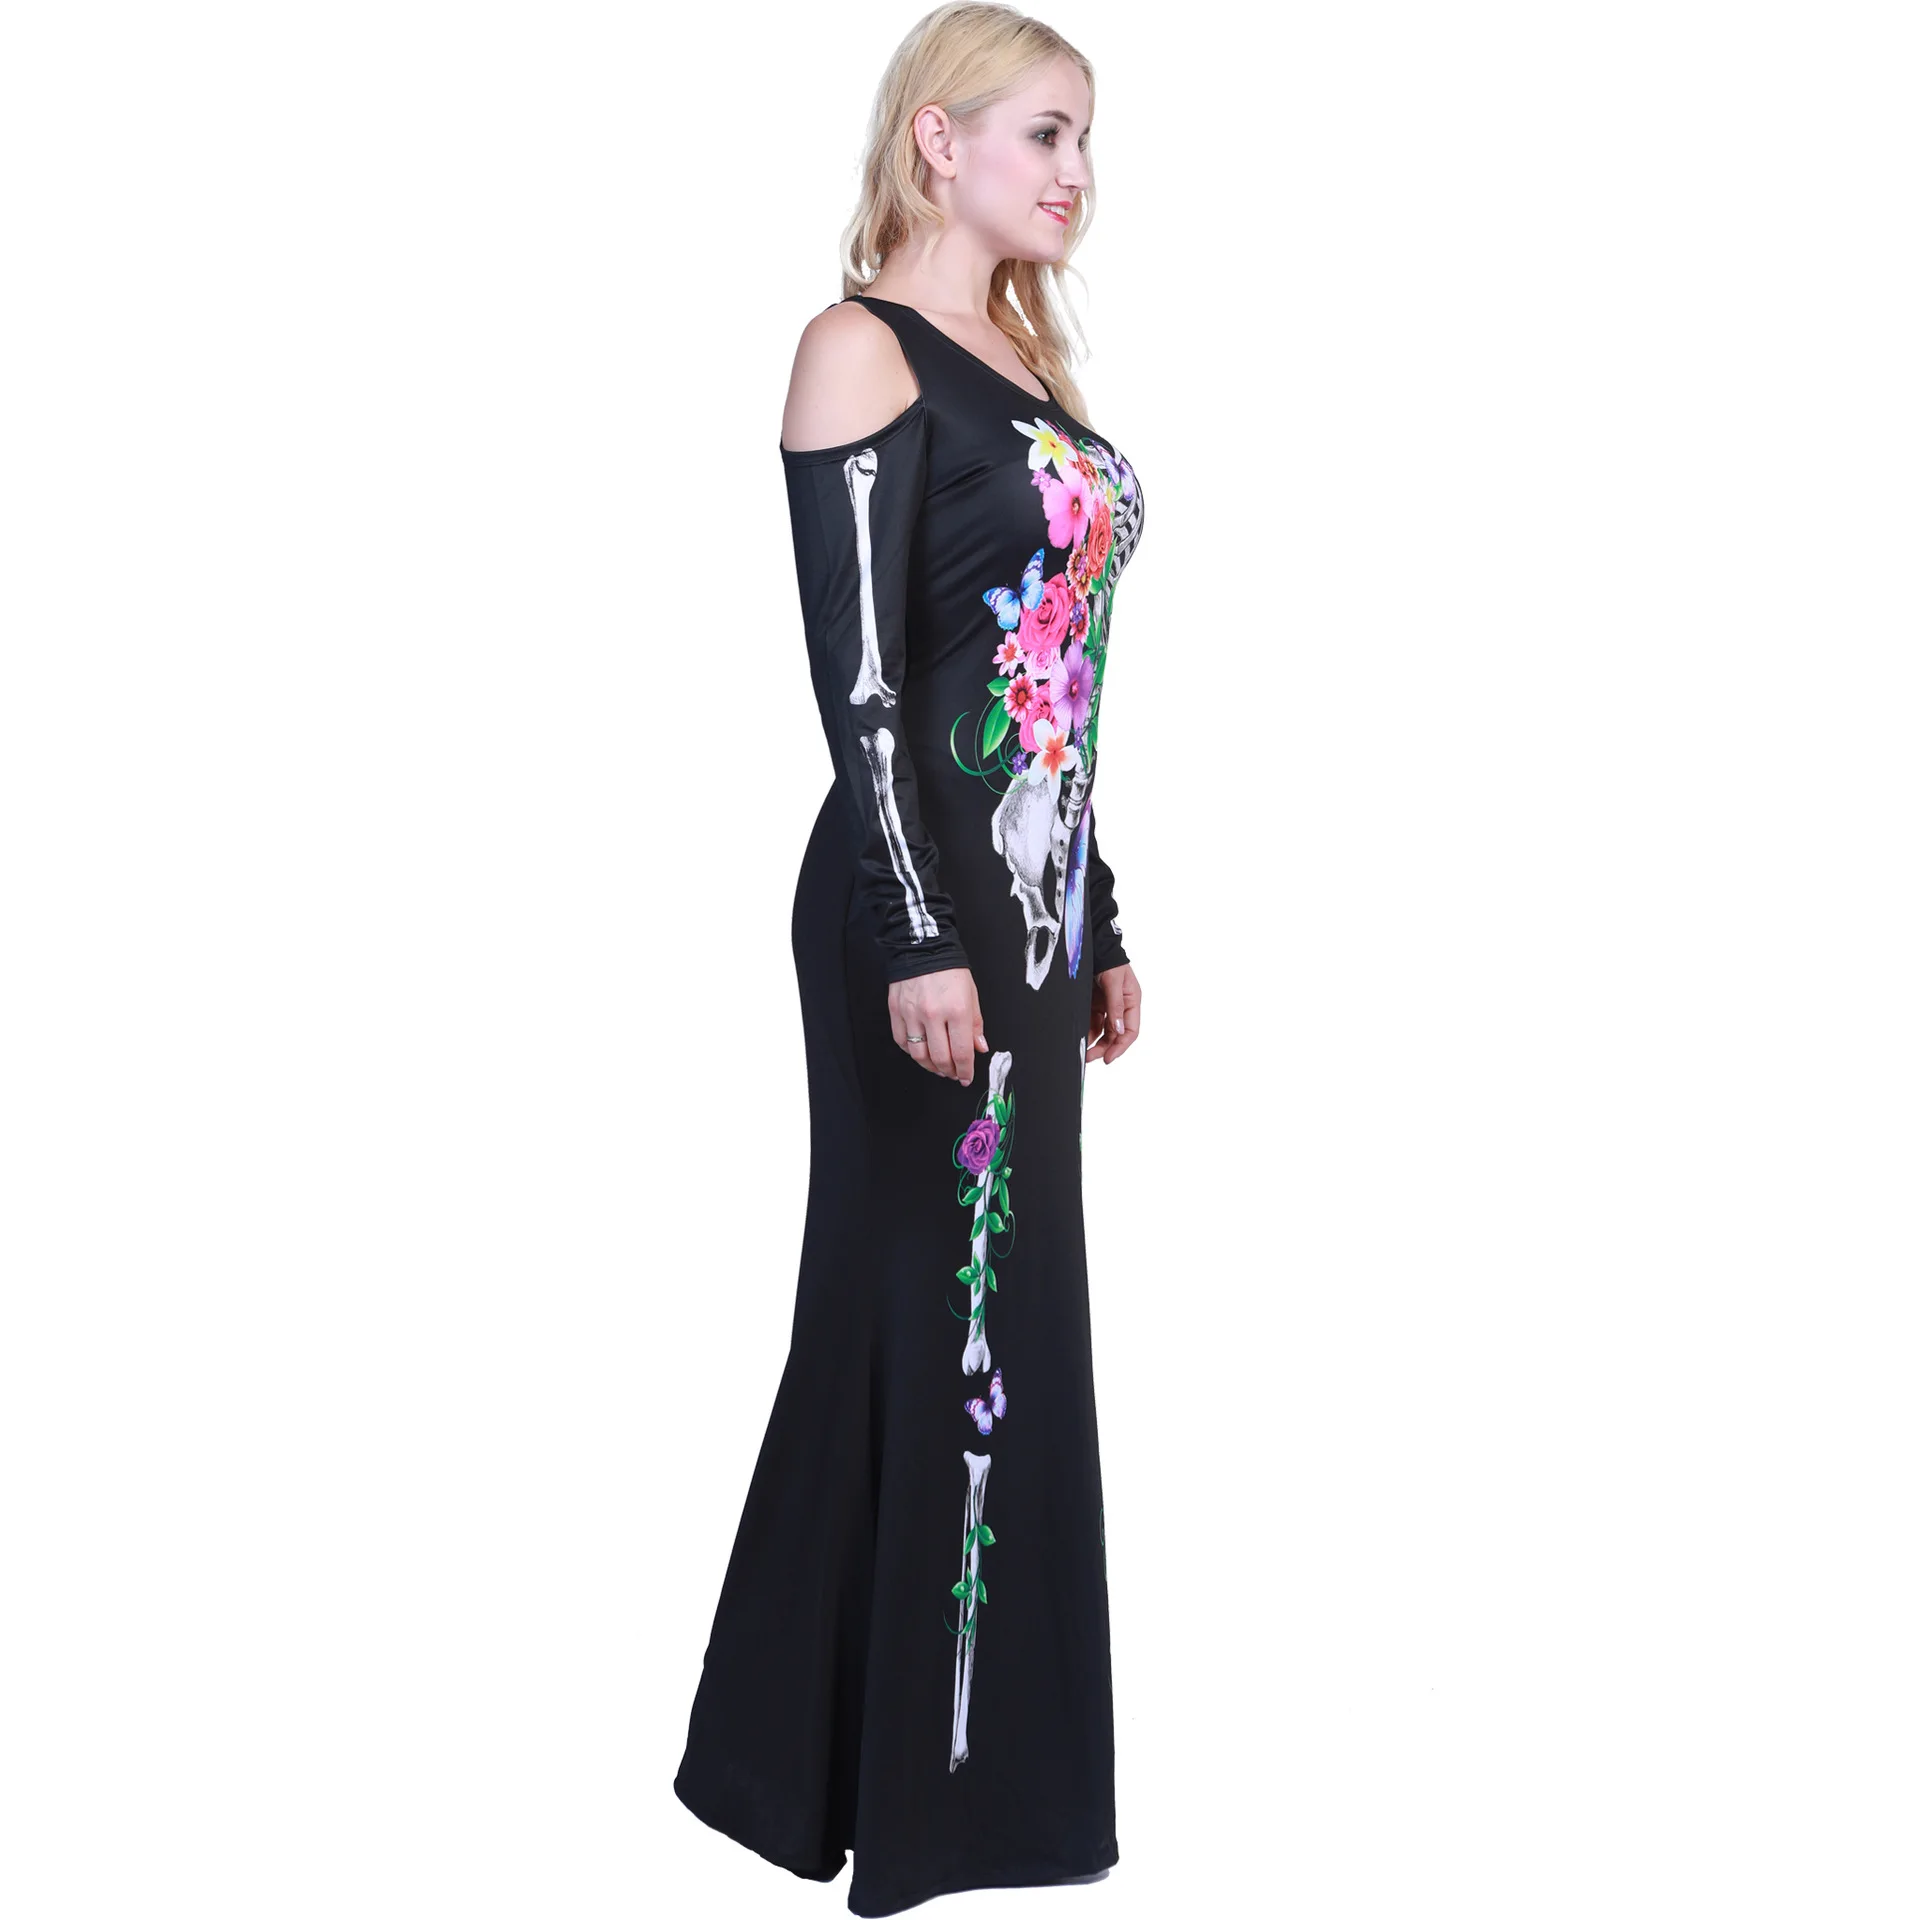 

Woman Flower Printing Skeleton Cosplay Female Halloween Day Of The Dead Costumes Carnival Purim Nightclub Role Play Party Dress